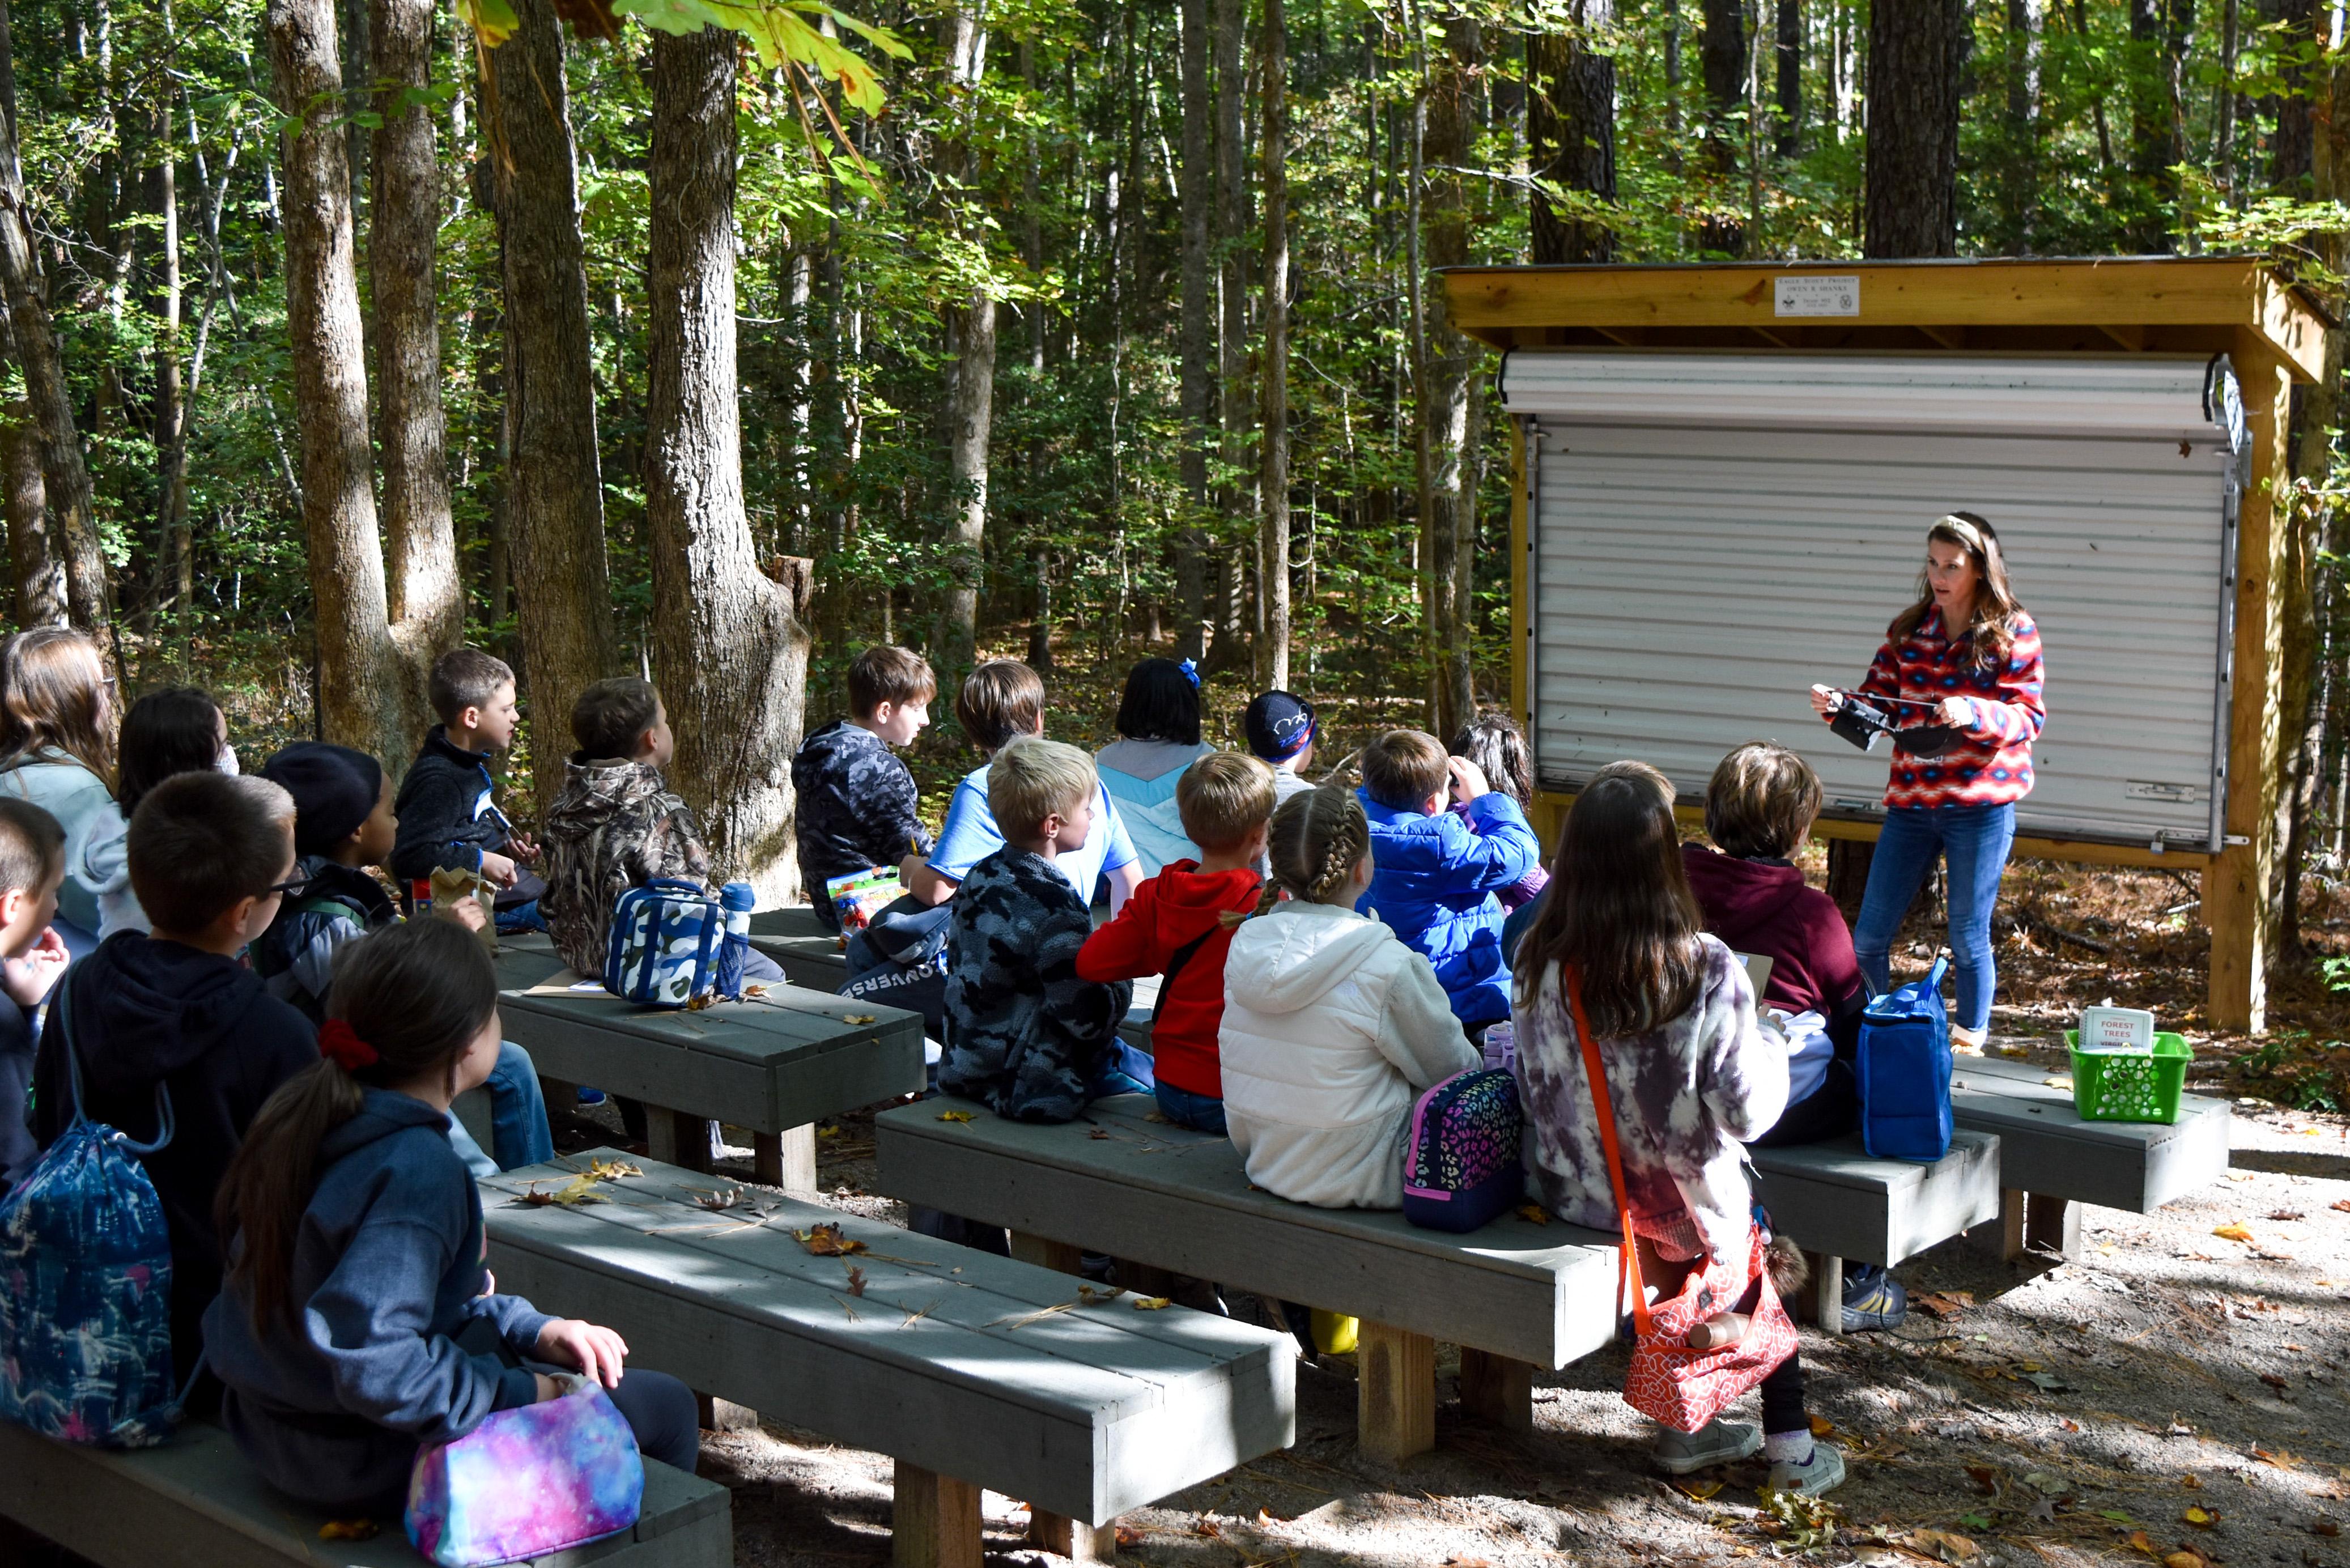 Students listen to instructions at the outdoor classroom area.